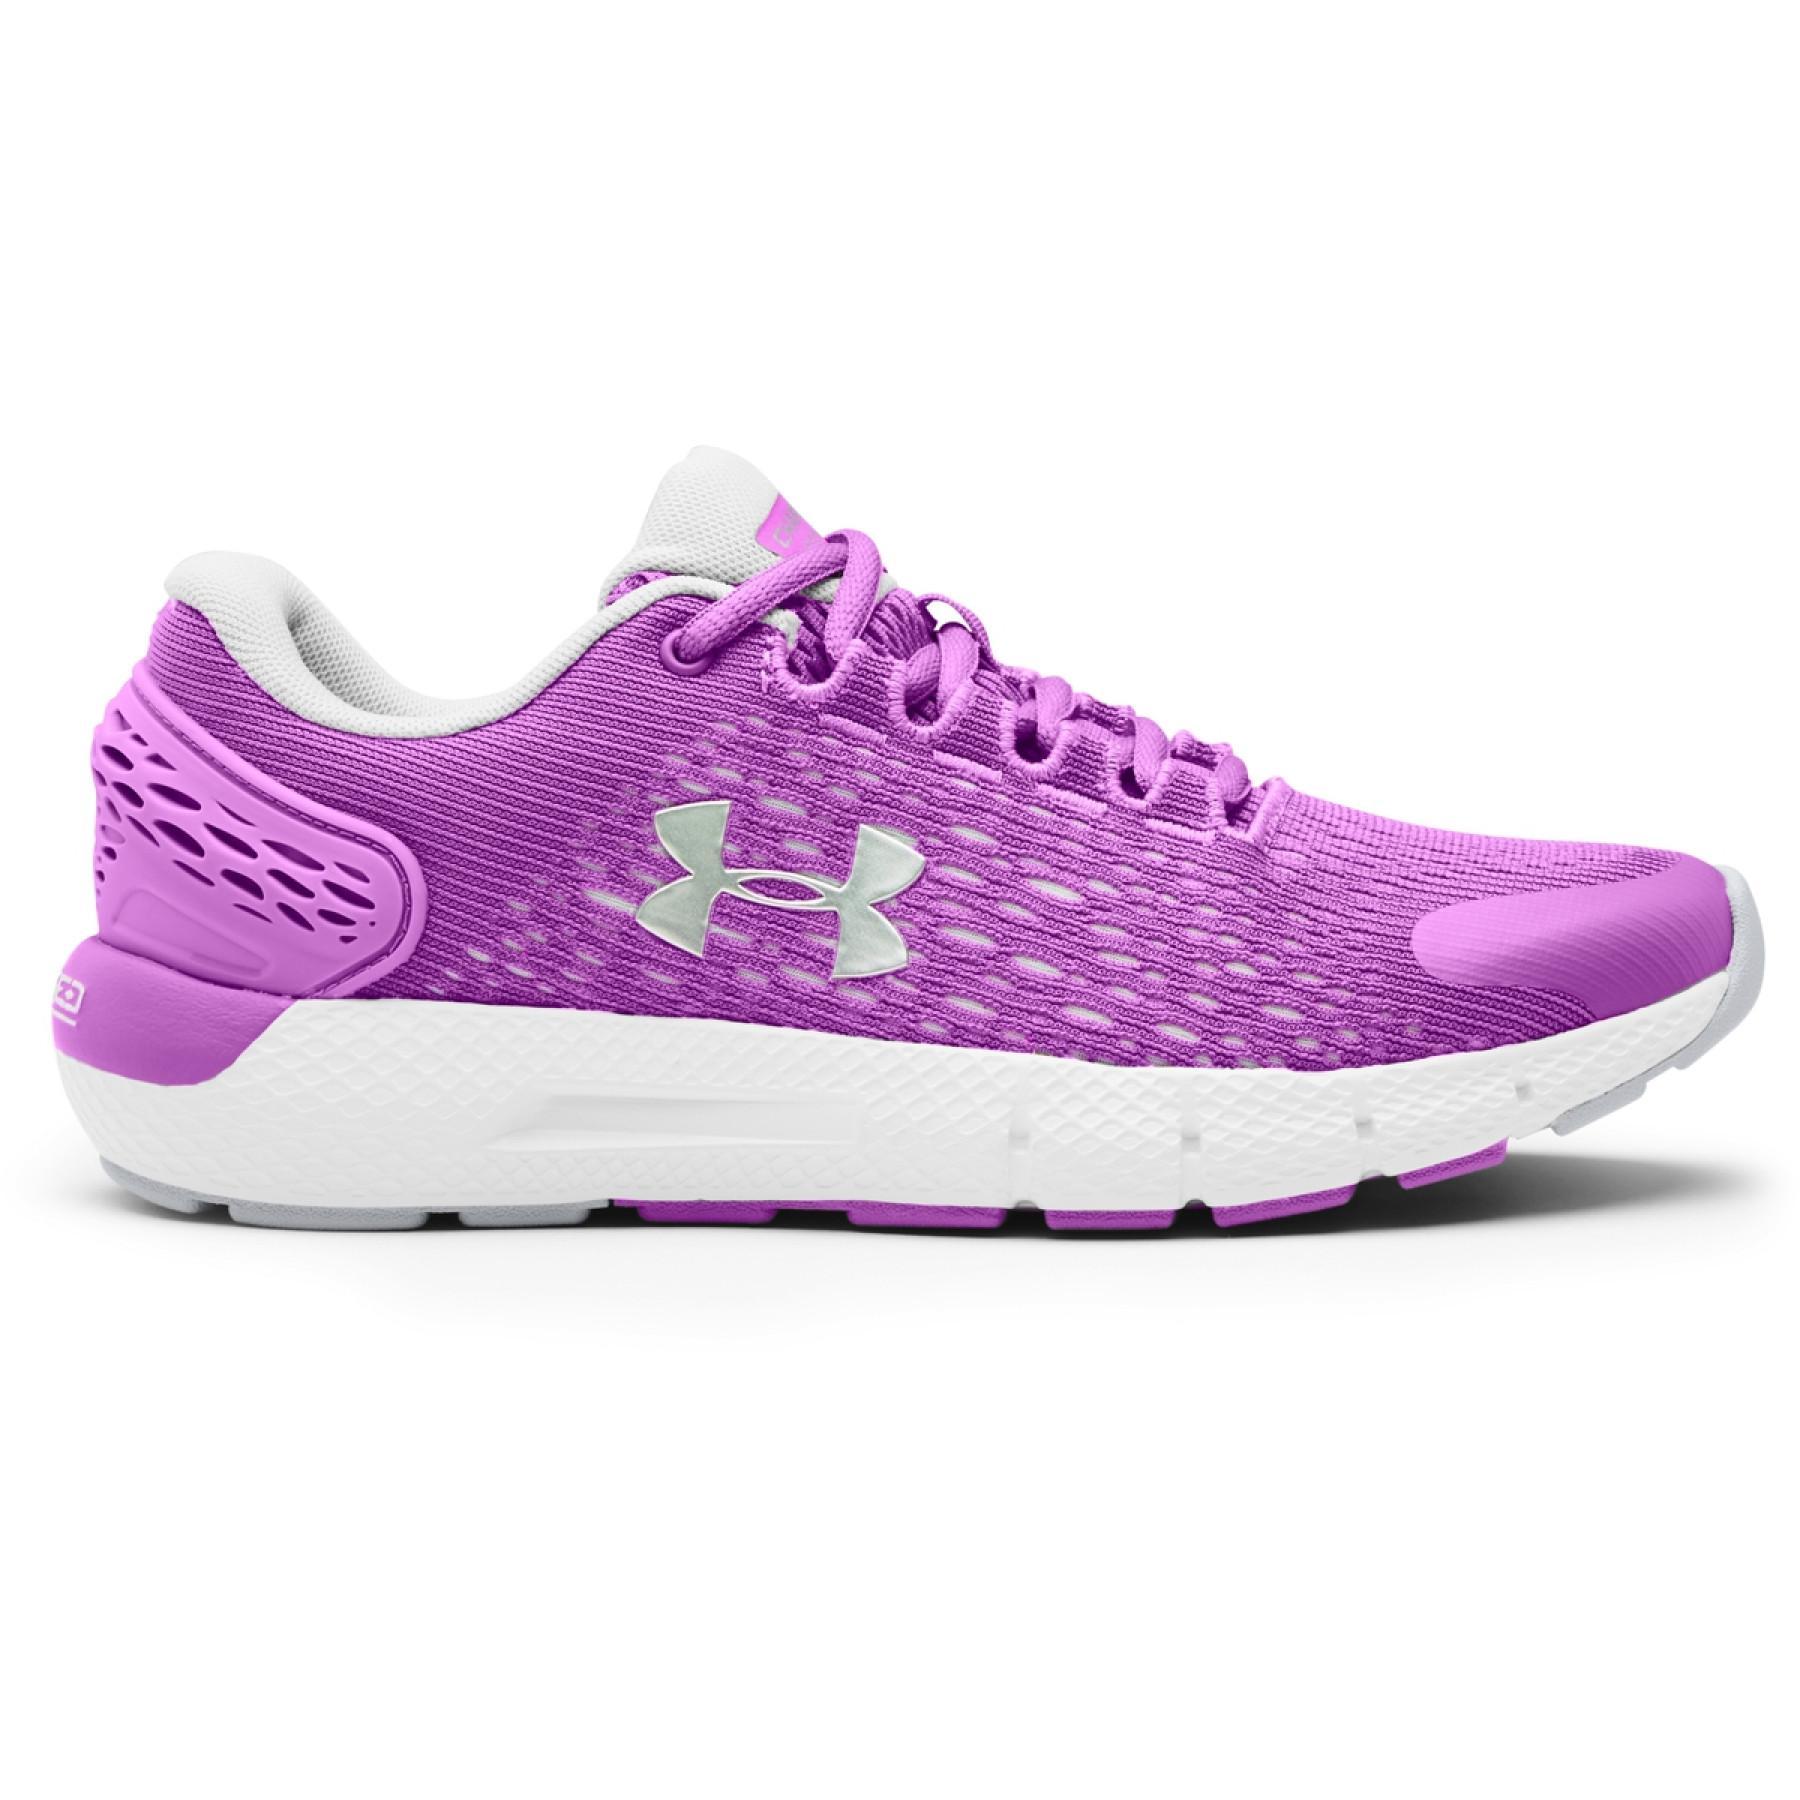 Chaussures de running enfant Under Armour Grade School Charged Rogue 2